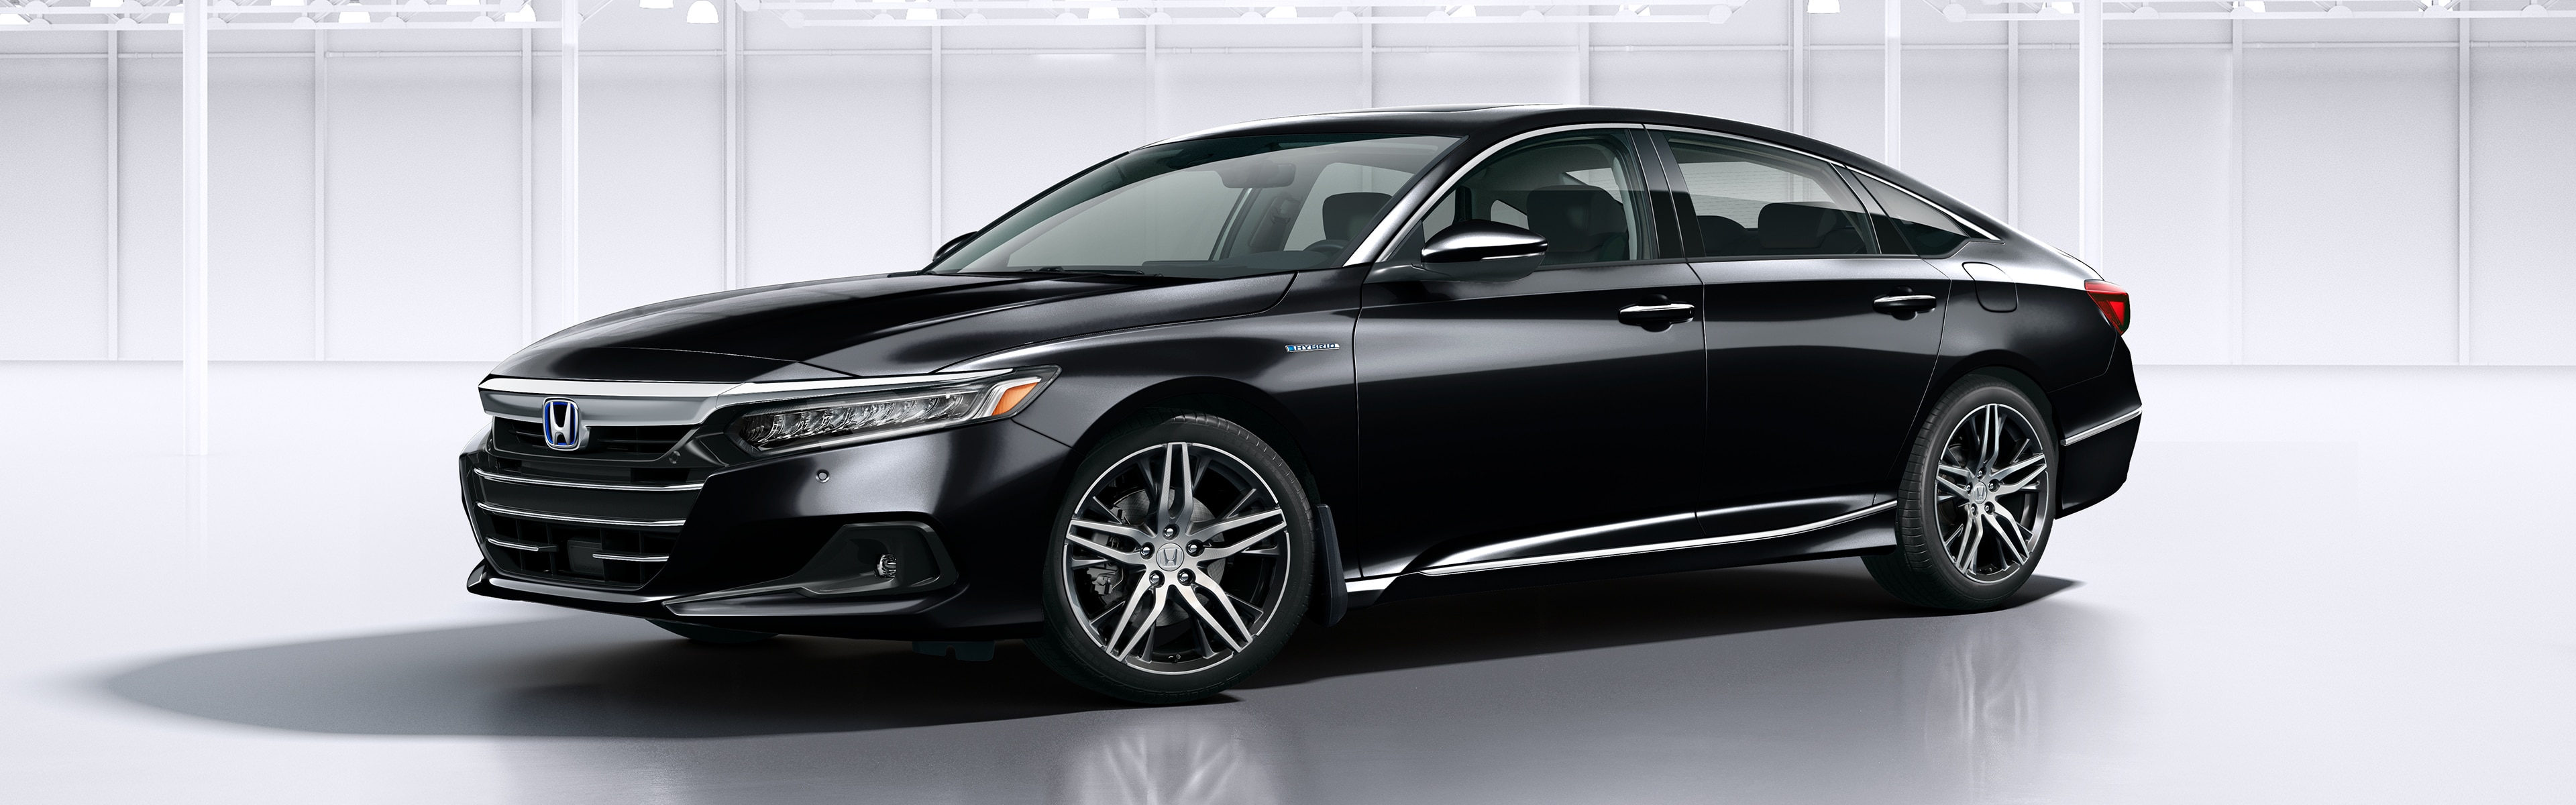 Image of 2018 Accord Hybrid profile view